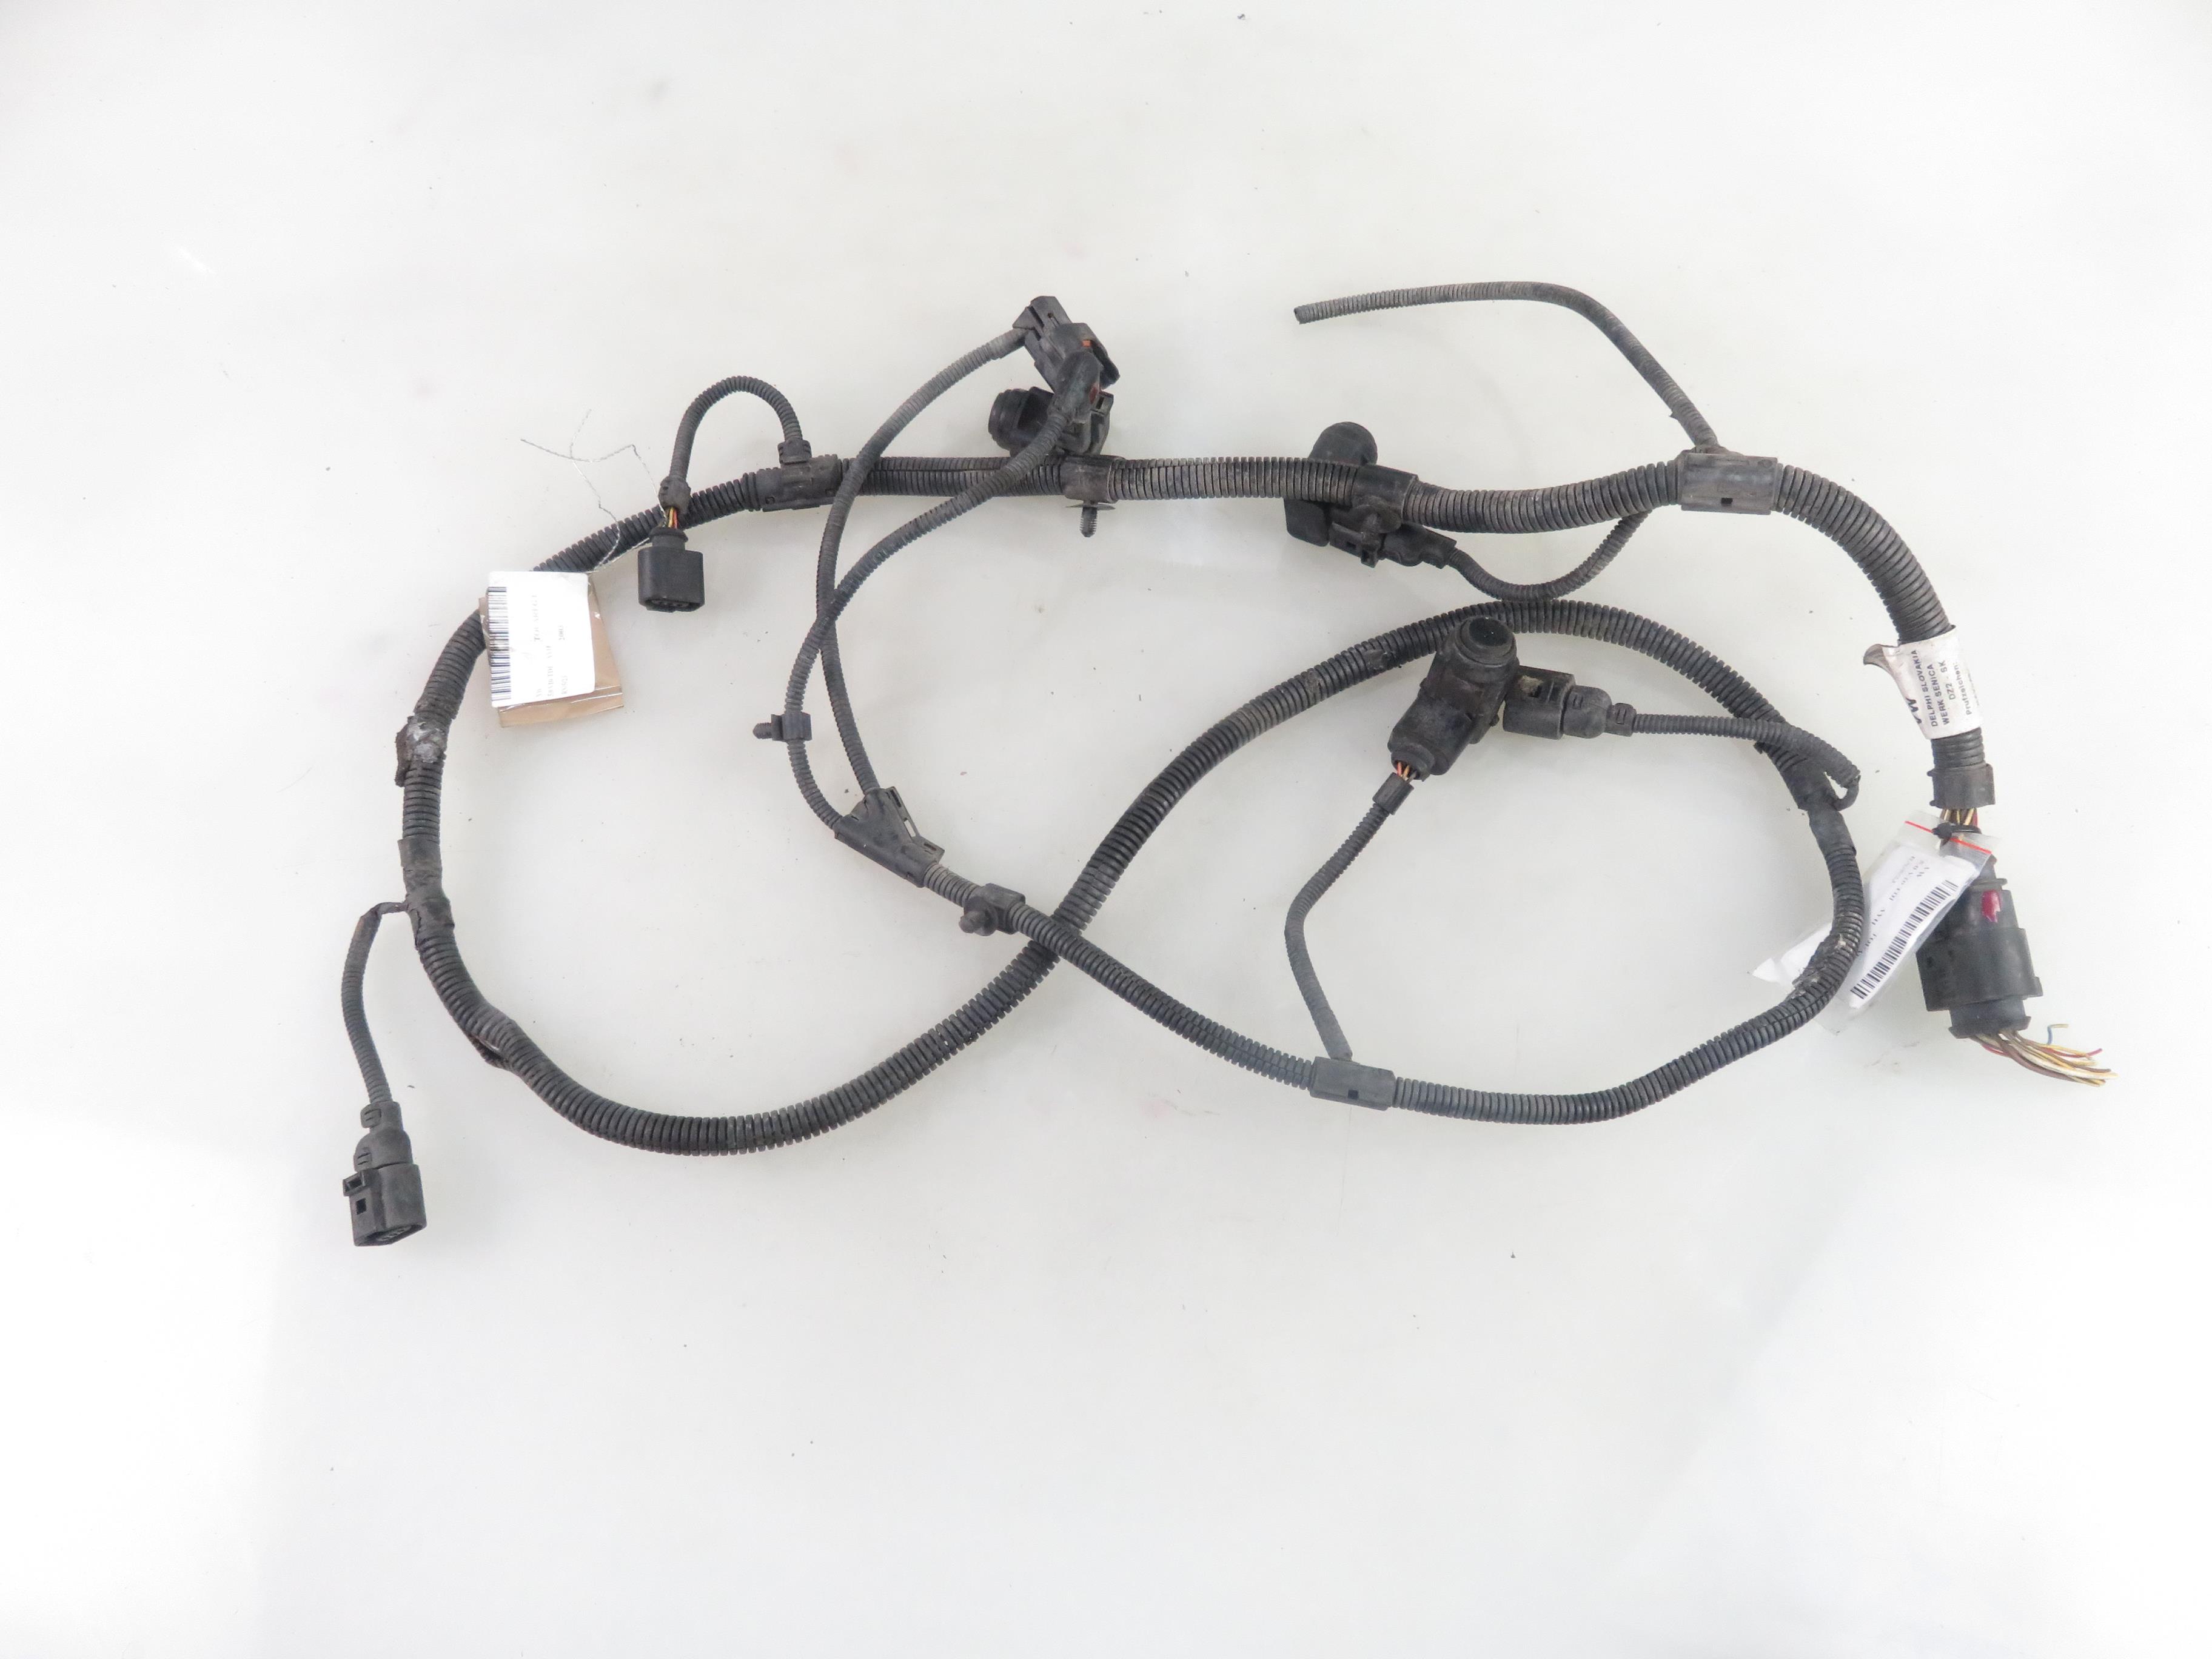 VOLKSWAGEN Touareg 1 generation (2002-2010) Cable Harness 7L6971095A, 0263003187 25271261